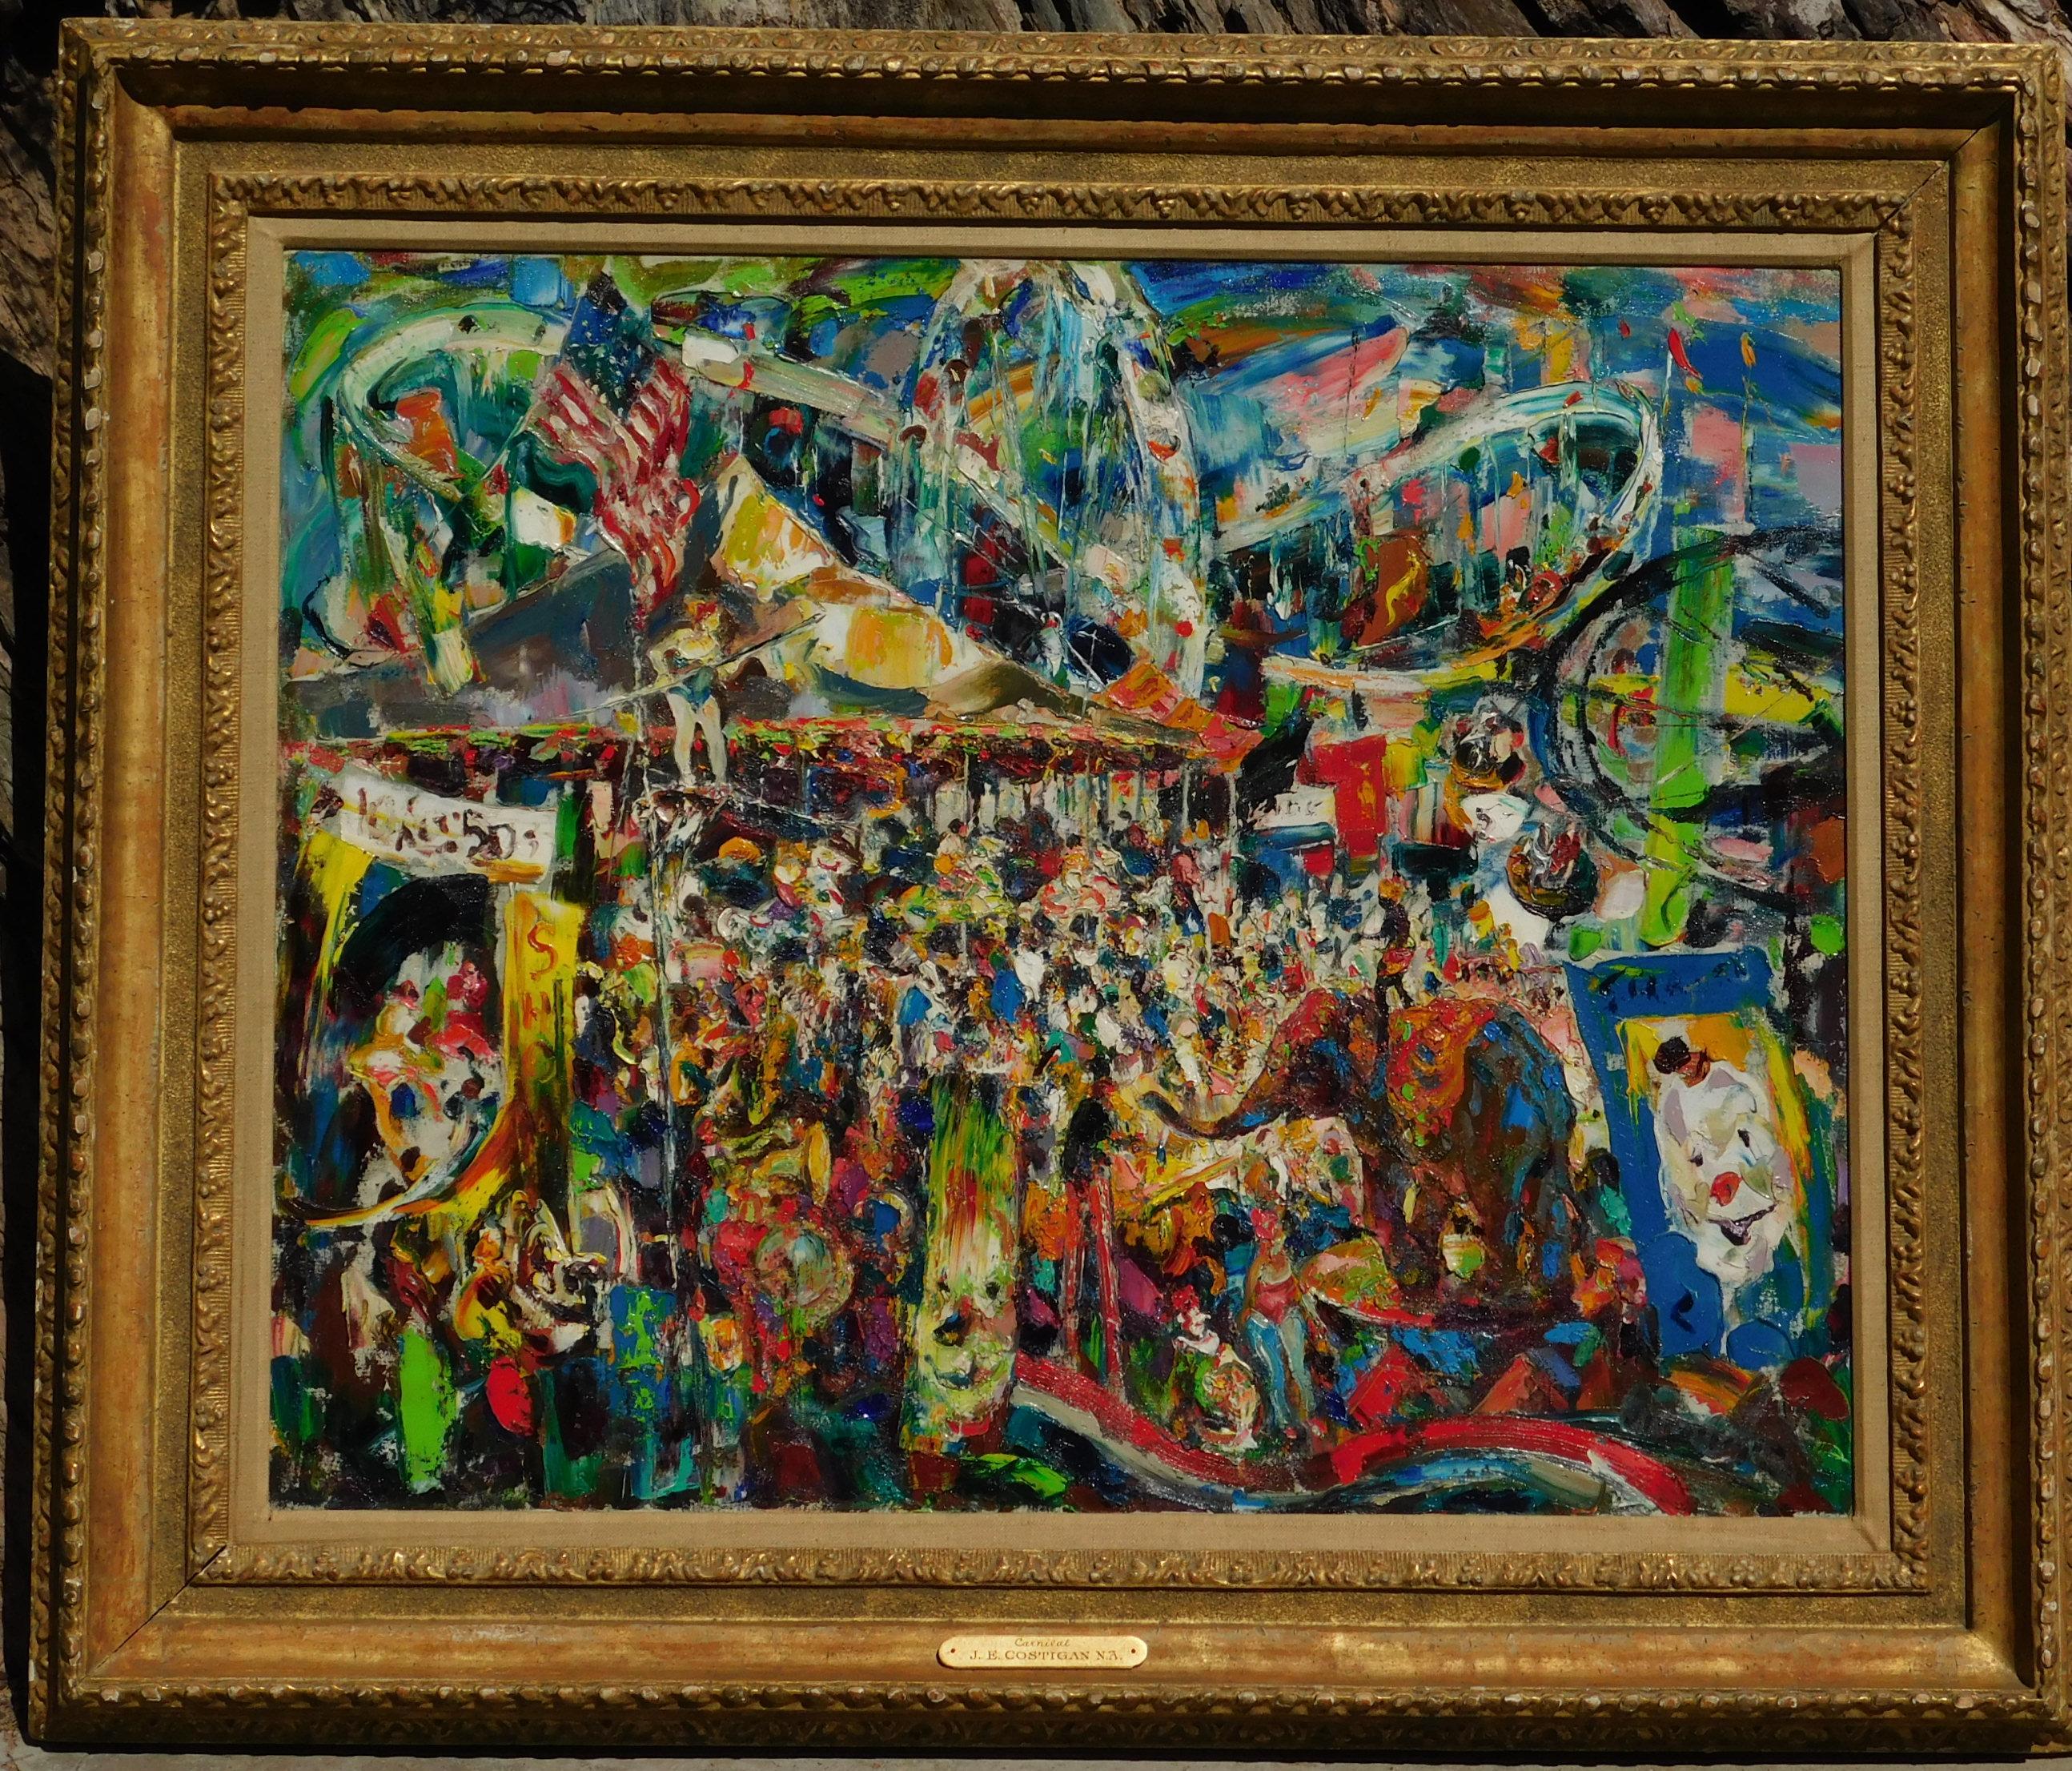 John Costigan (1888-1972) oil on canvas, circa: 1950s. In excellent condition.
Exciting Expressionist Painting of a lively Carnival Scene. Signed lower right: ''J.E. Costigan